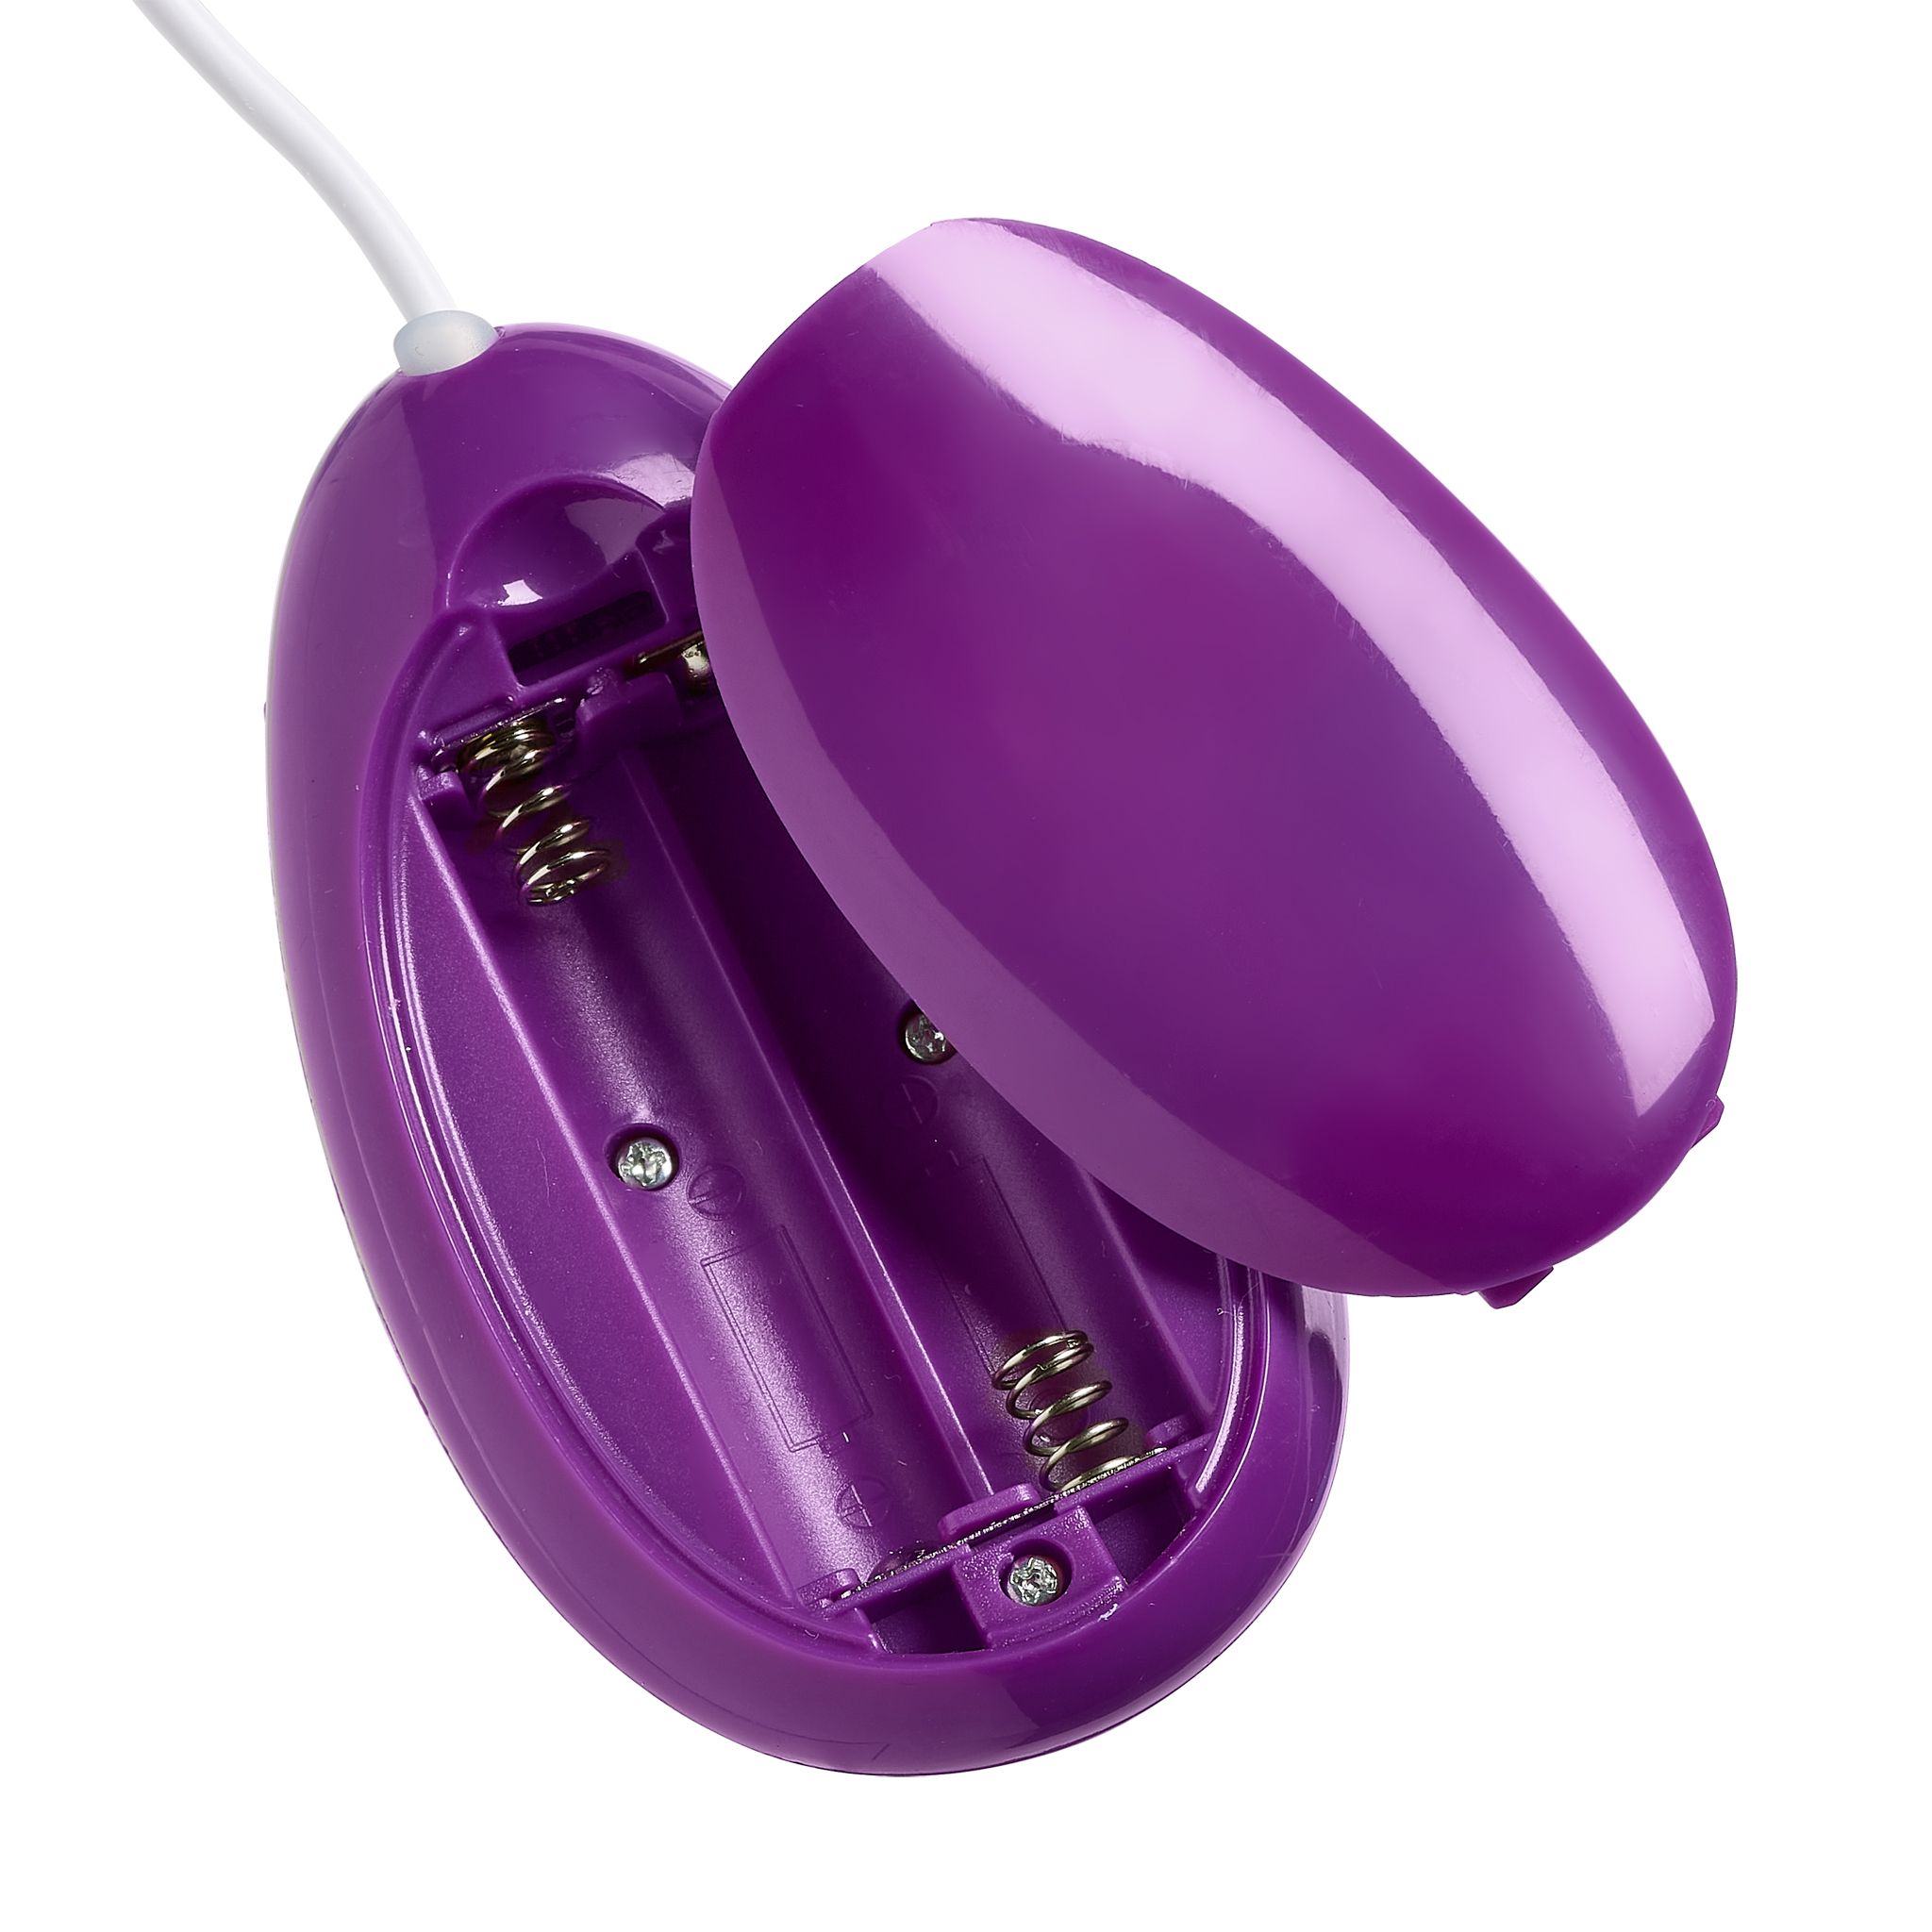 CLOUD 9 20 SPEED BULLET PURPLE W/ REMOTE - Click Image to Close